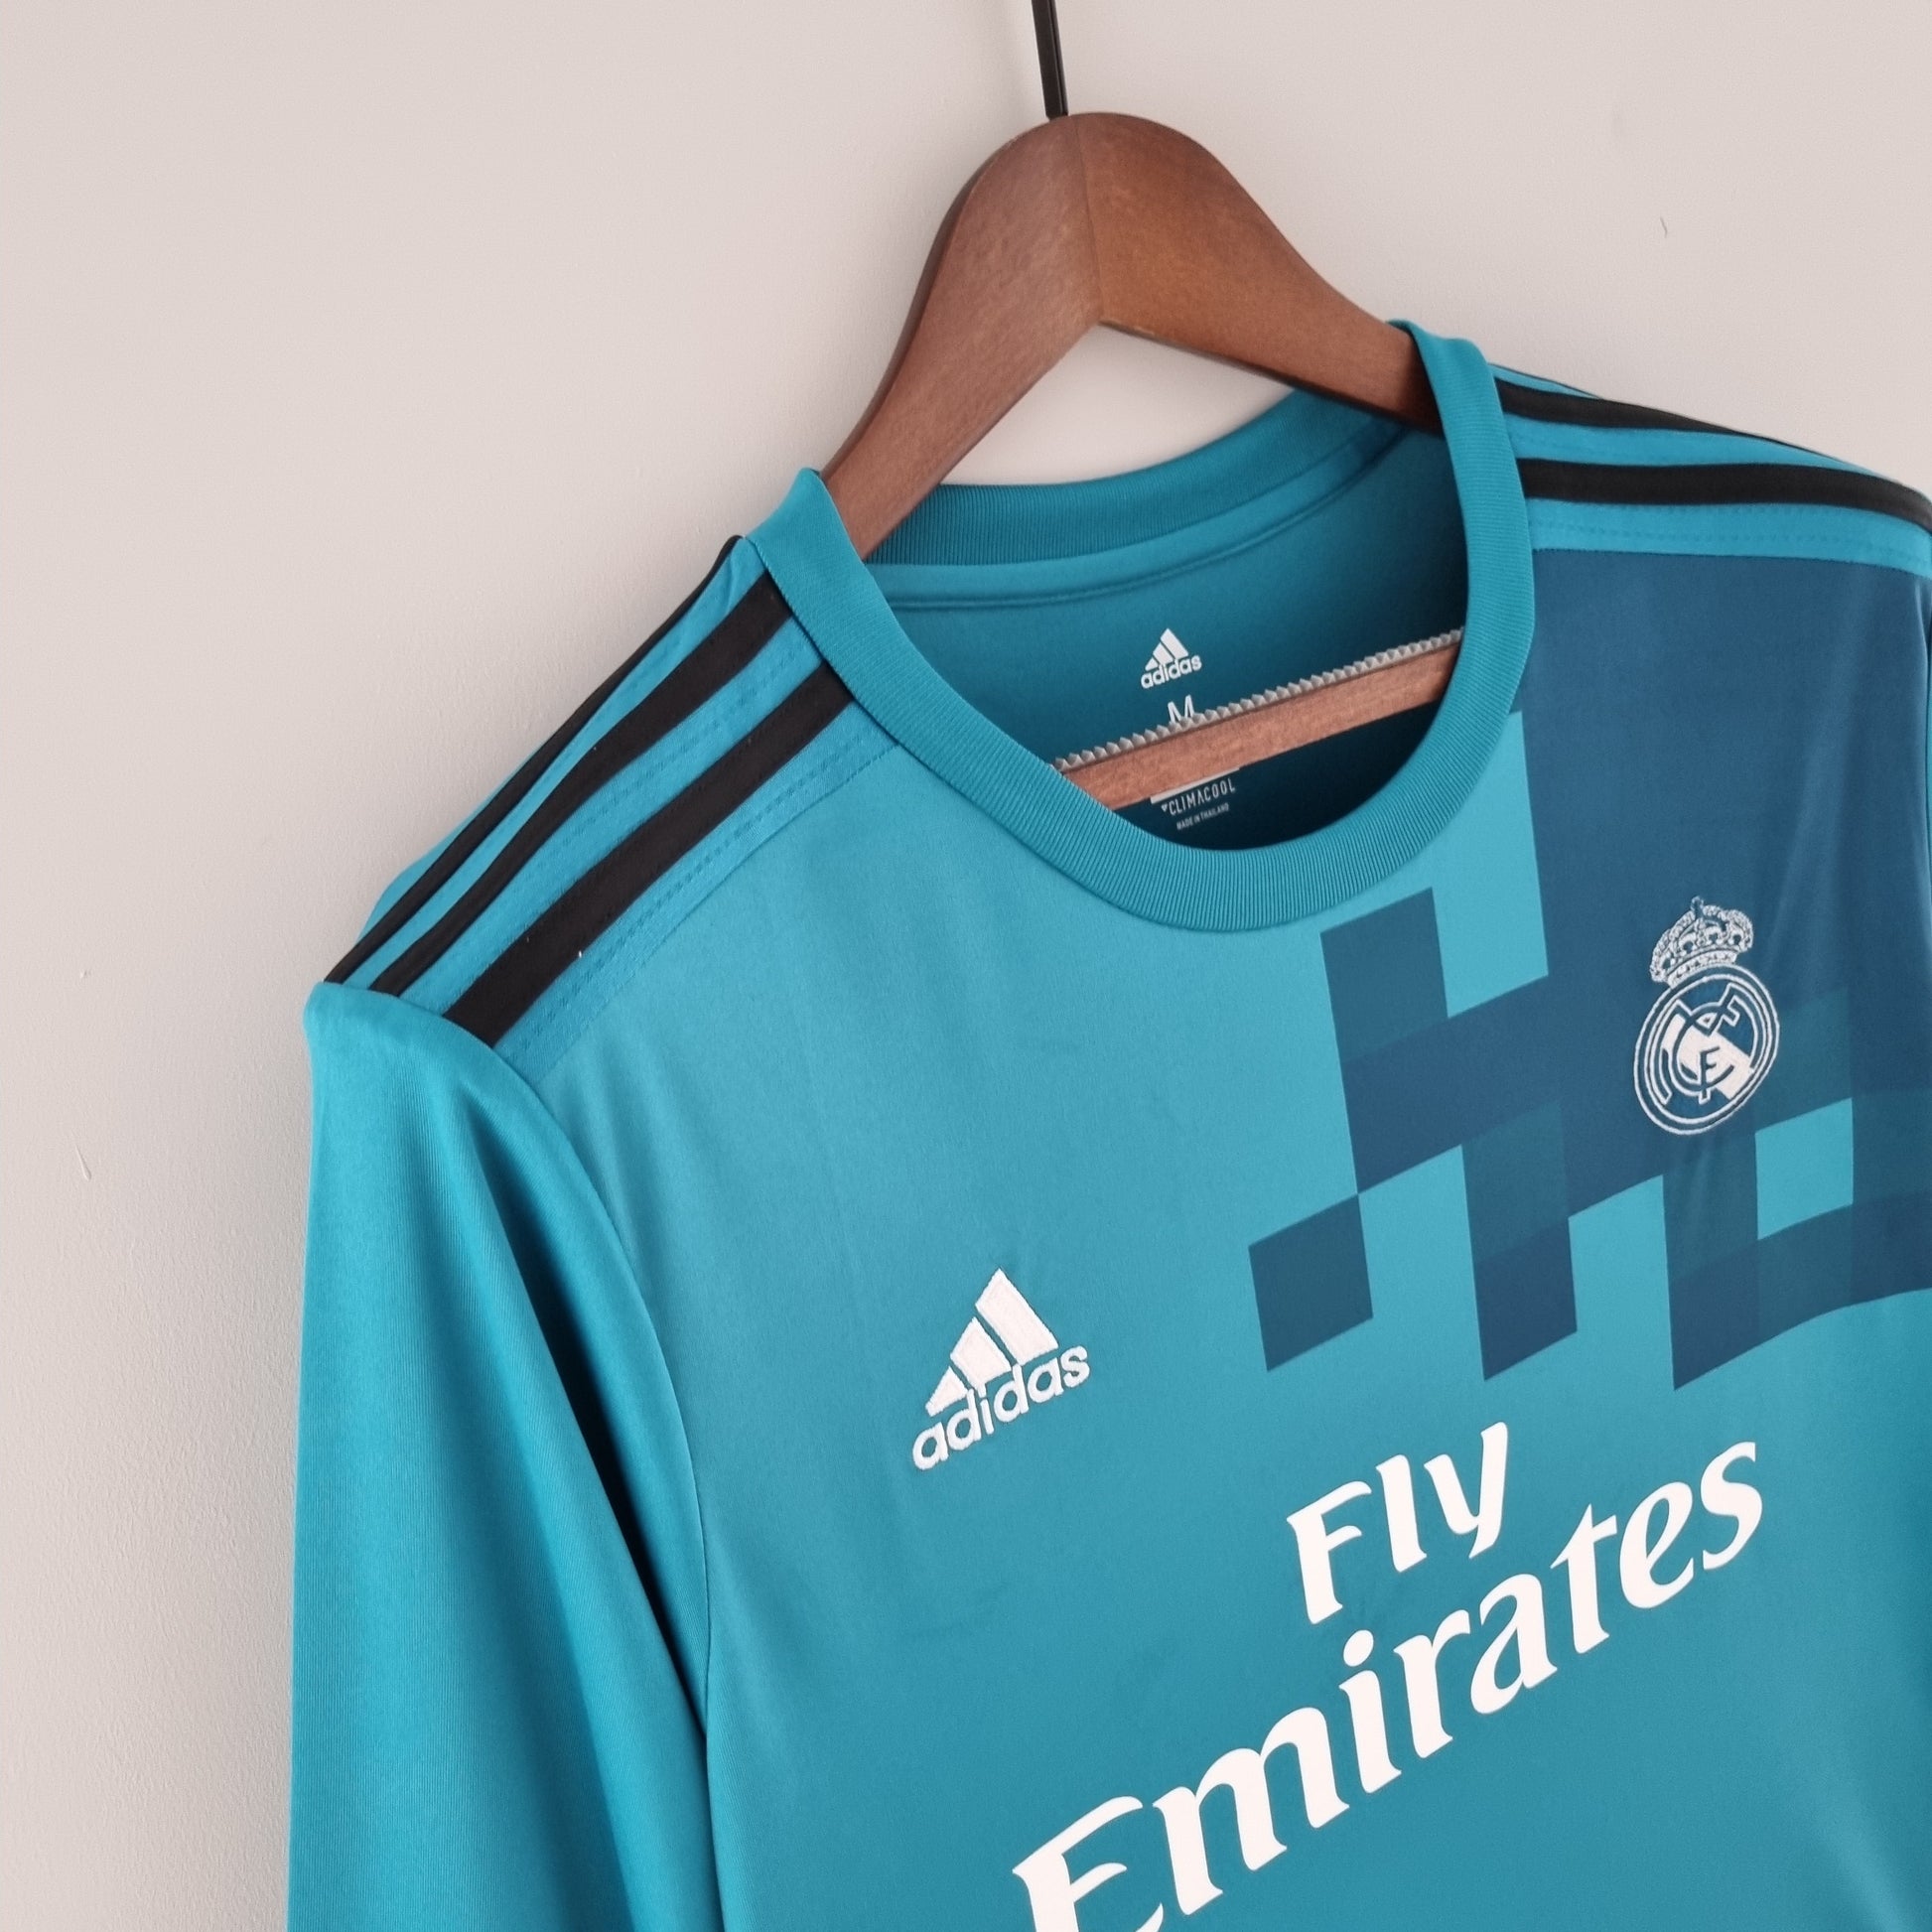 ADIDAS REAL MADRID 2018 3RD JERSEY teal blue